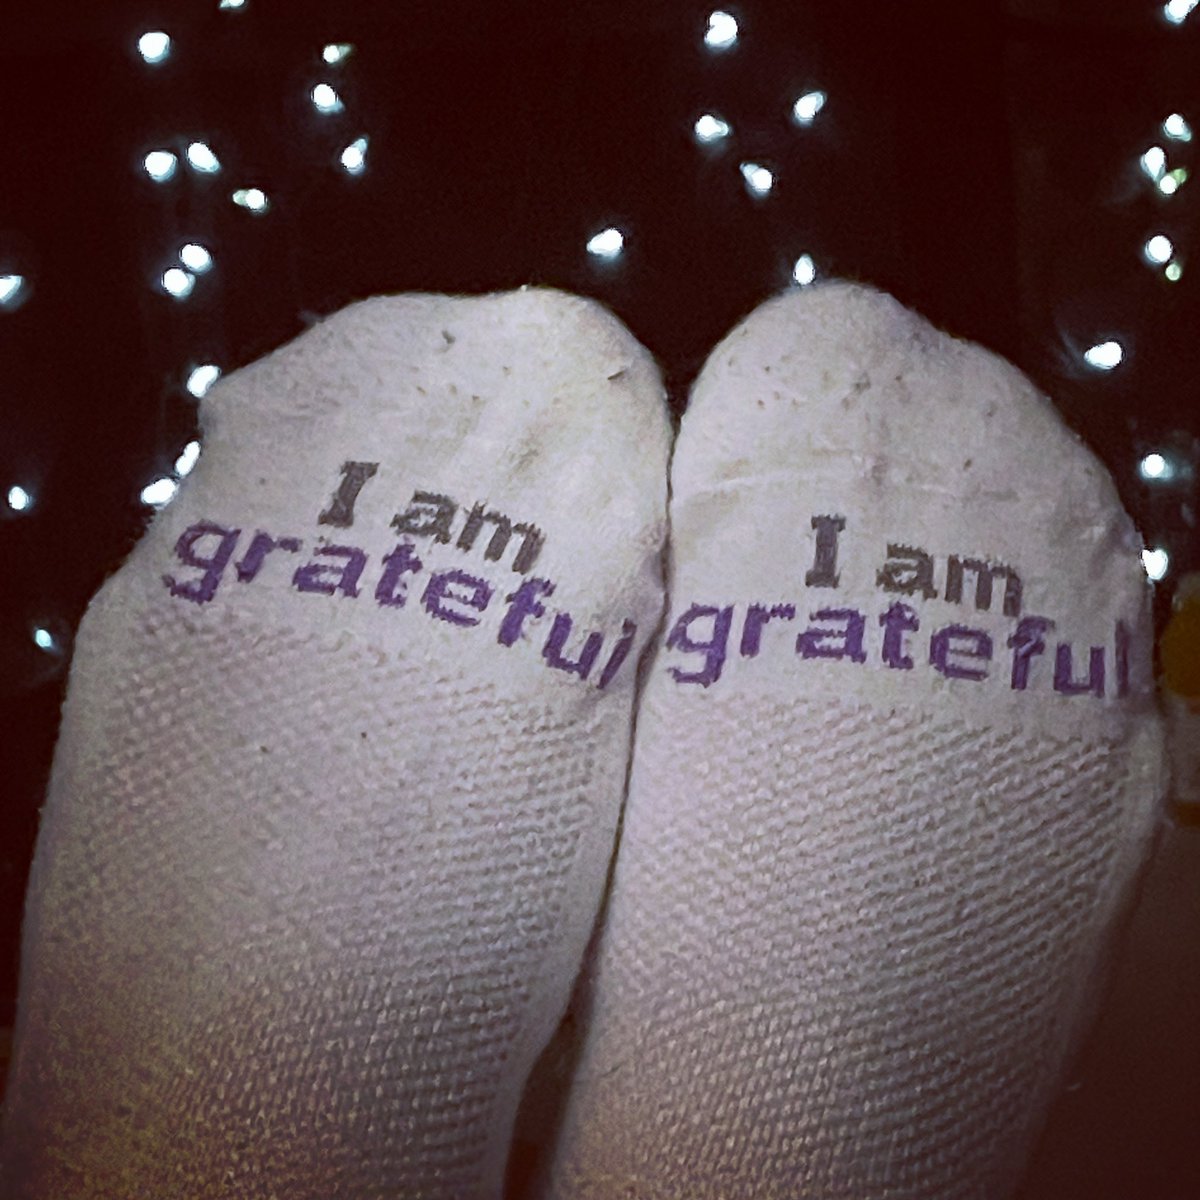 I pulled on some socks this evening. How true they are! ☺️ #notestoselfsocks #grateful